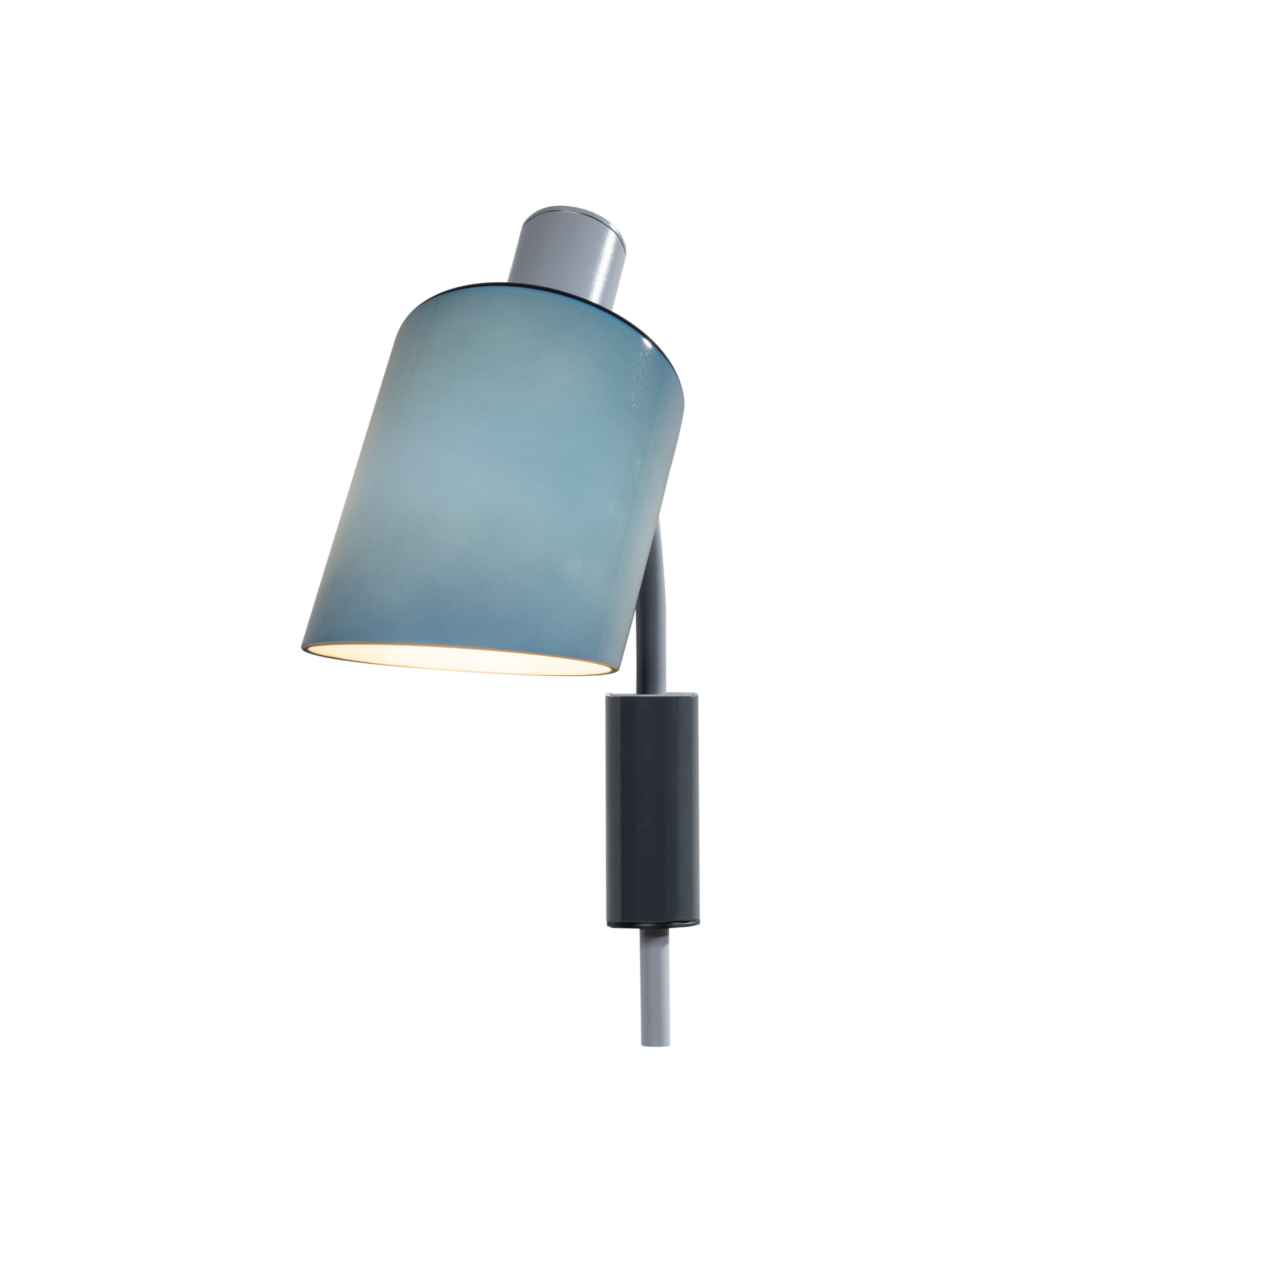 petrol blue grey Glass wall light for reading  bedroom